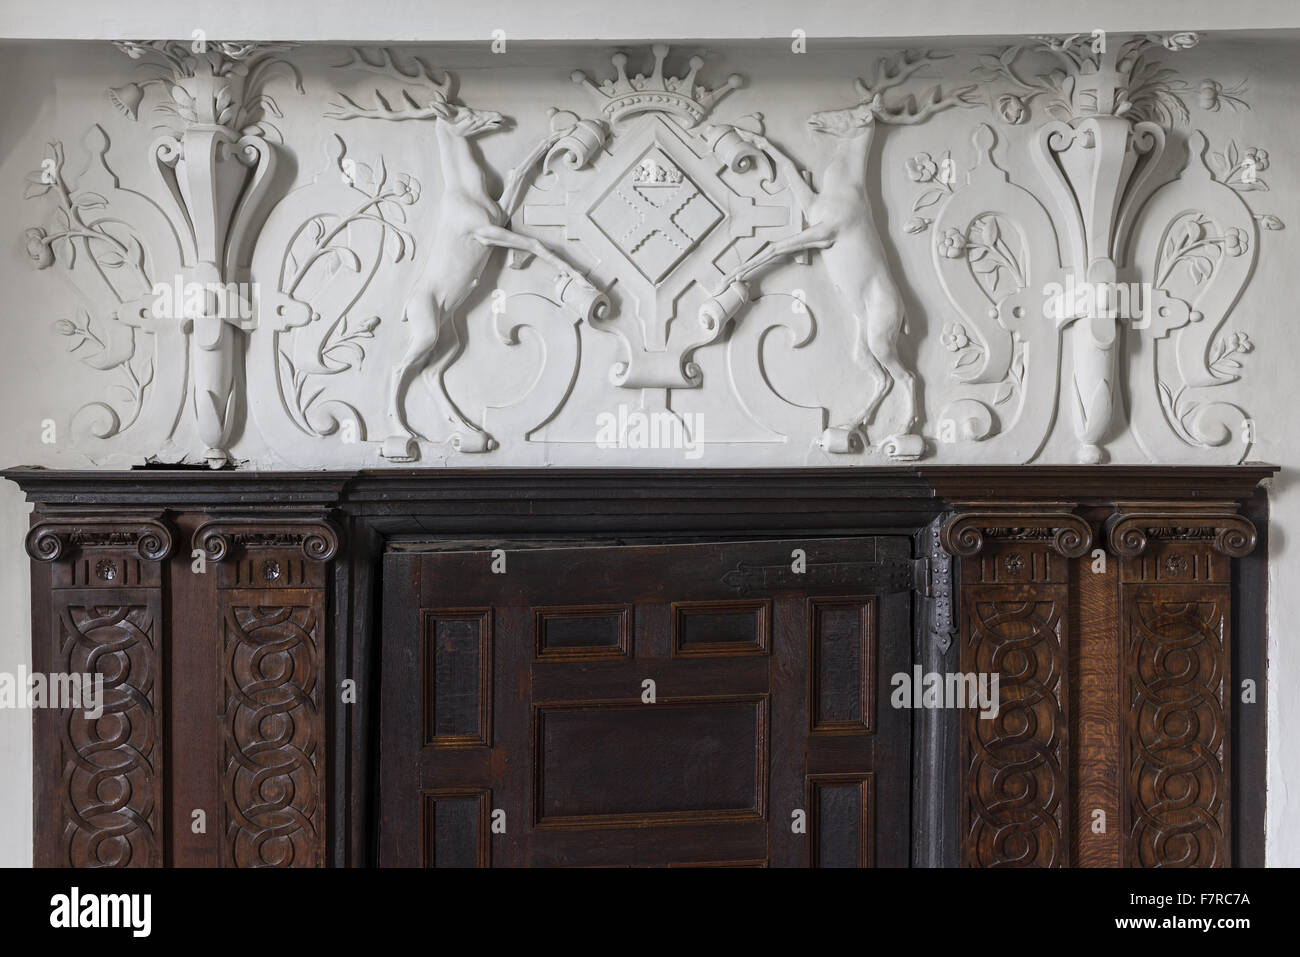 The Coat of Arms above the landing door into the High Great Chamber at Hardwick Hall, Derbyshire. Hardwick Hall was built in the late 16th century for Bess of Hardwick. Stock Photo